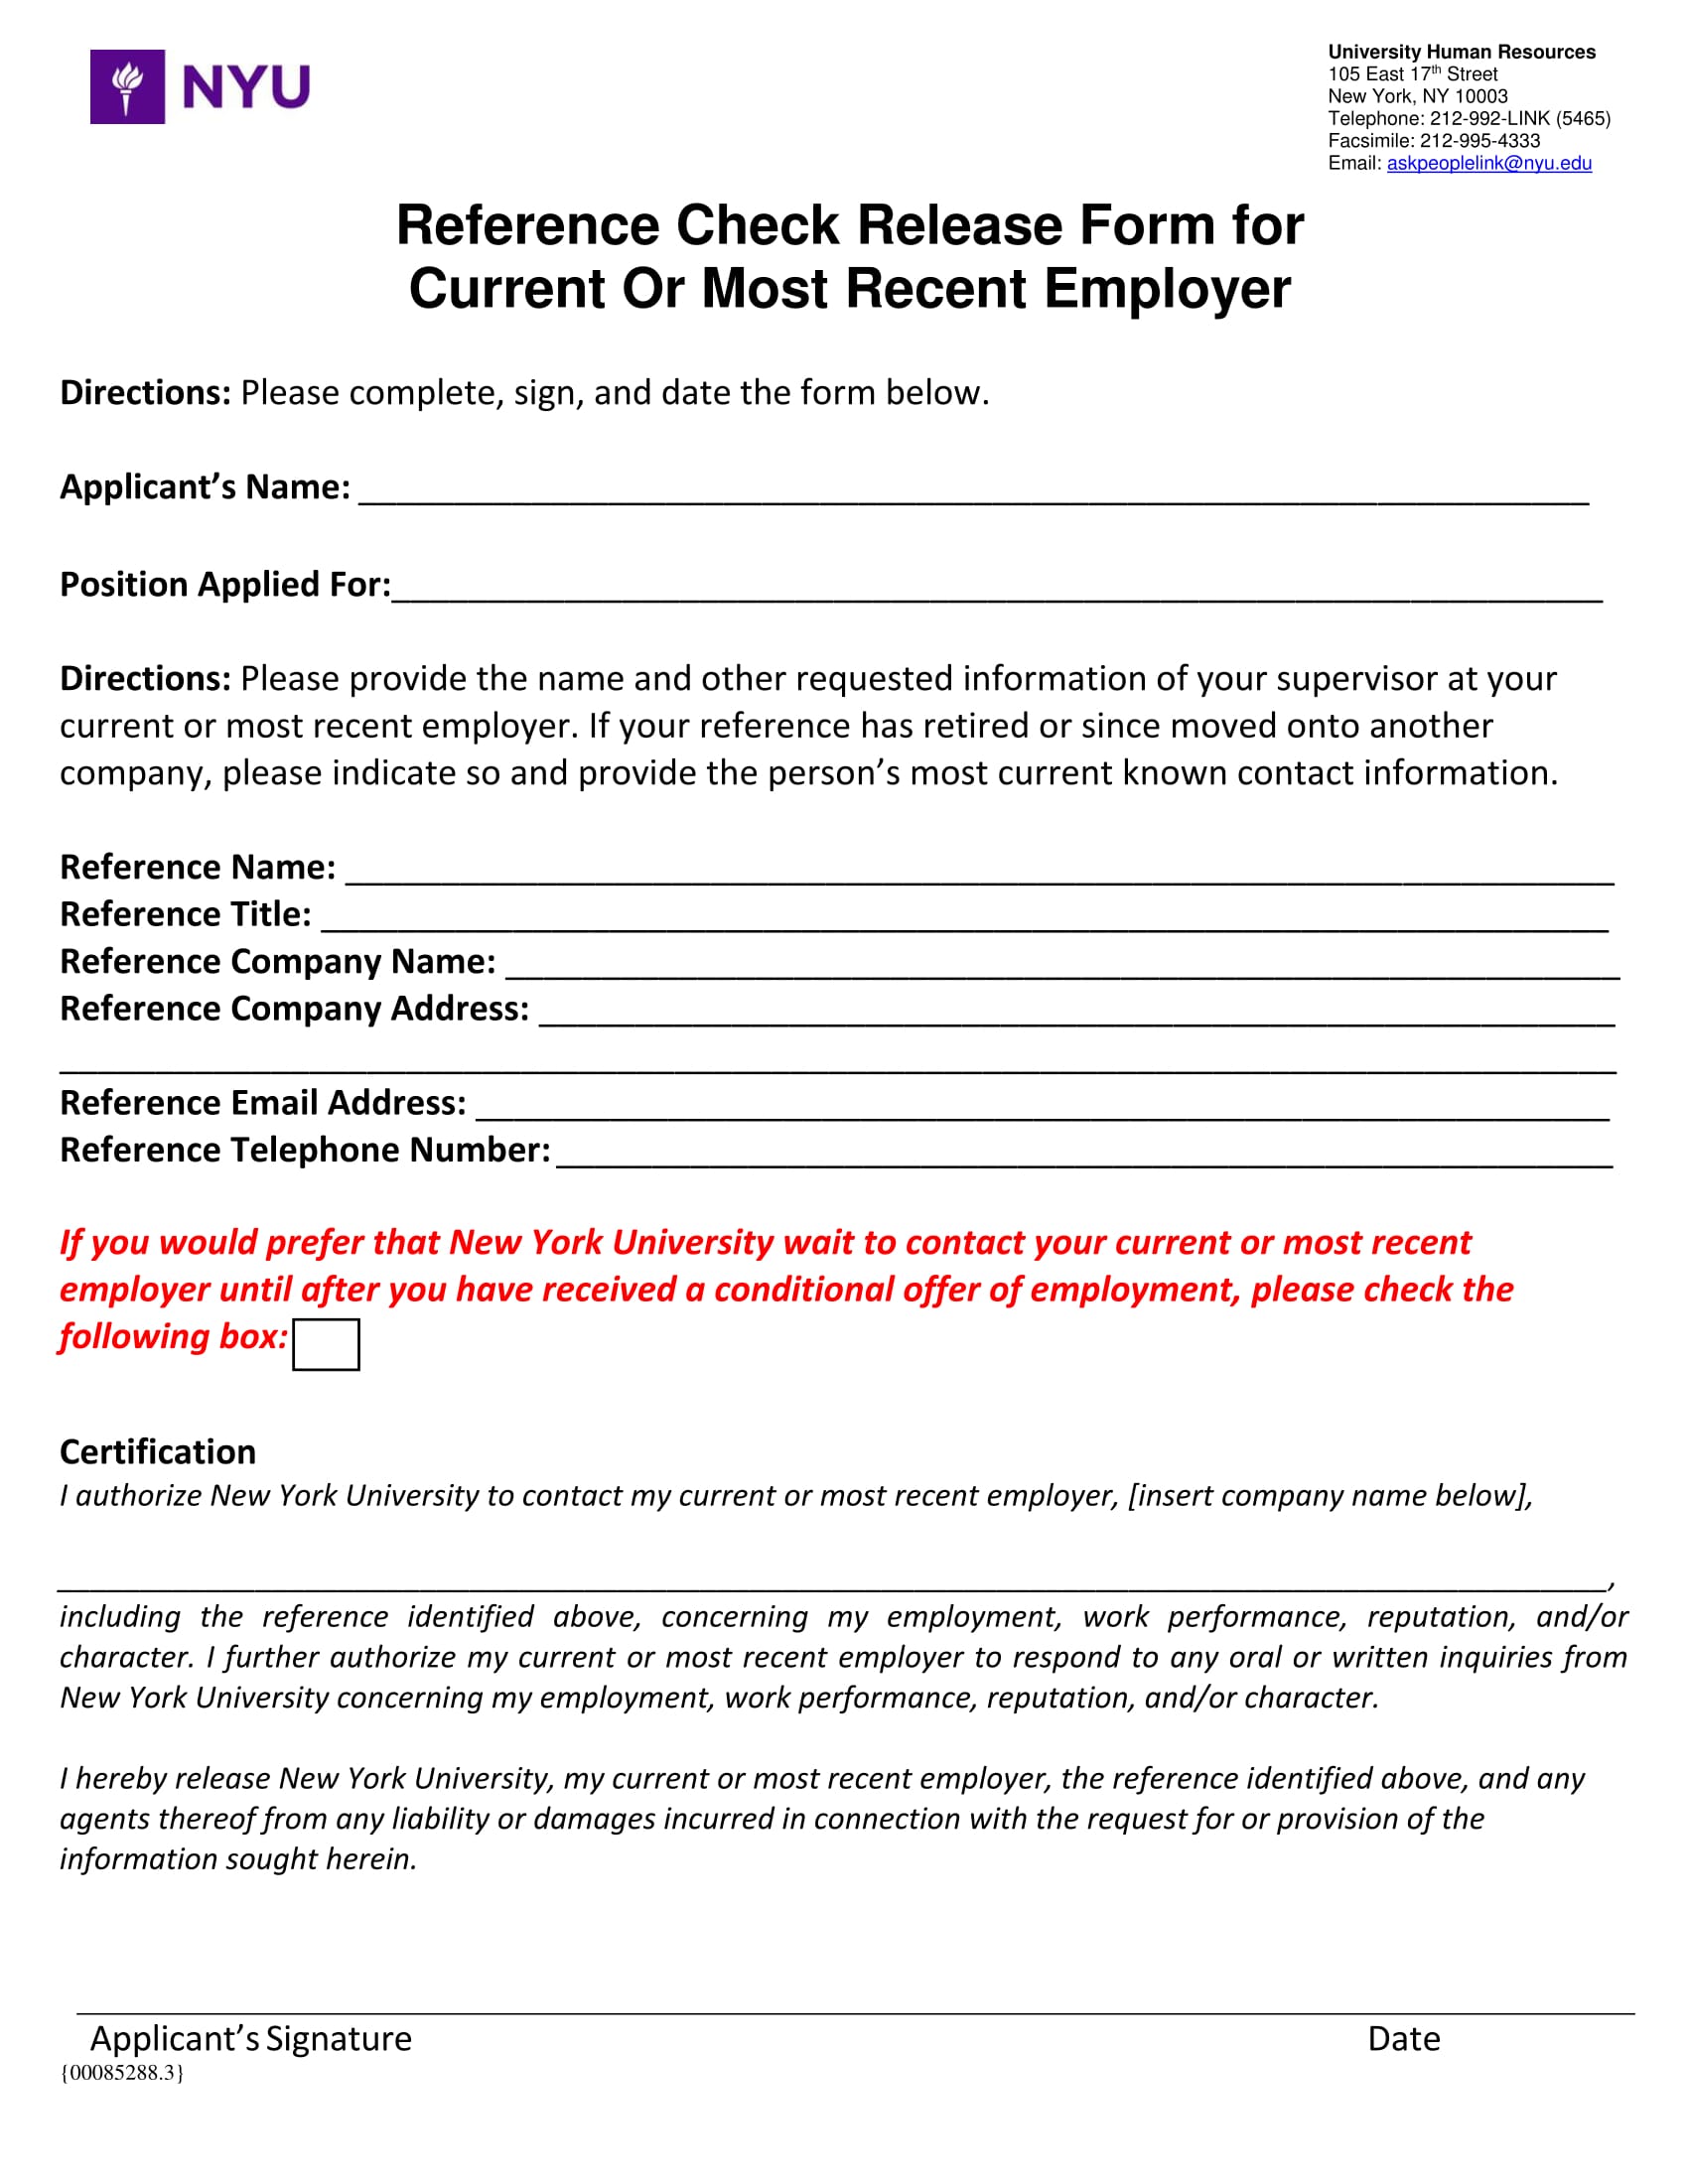 employer reference check release form 1